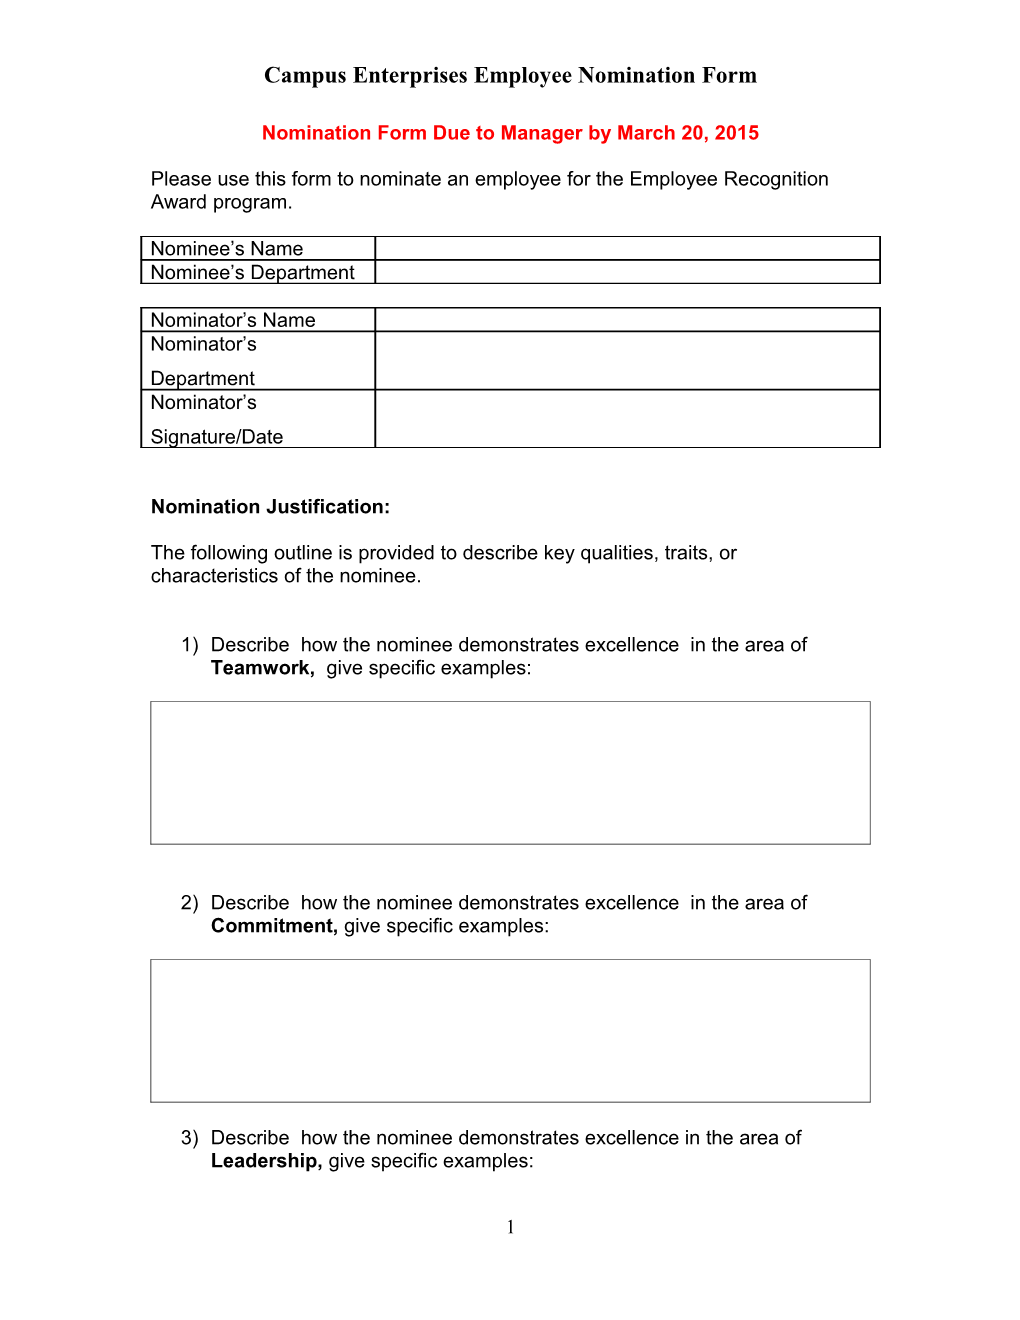 Employee Recognition Award Nomination Form